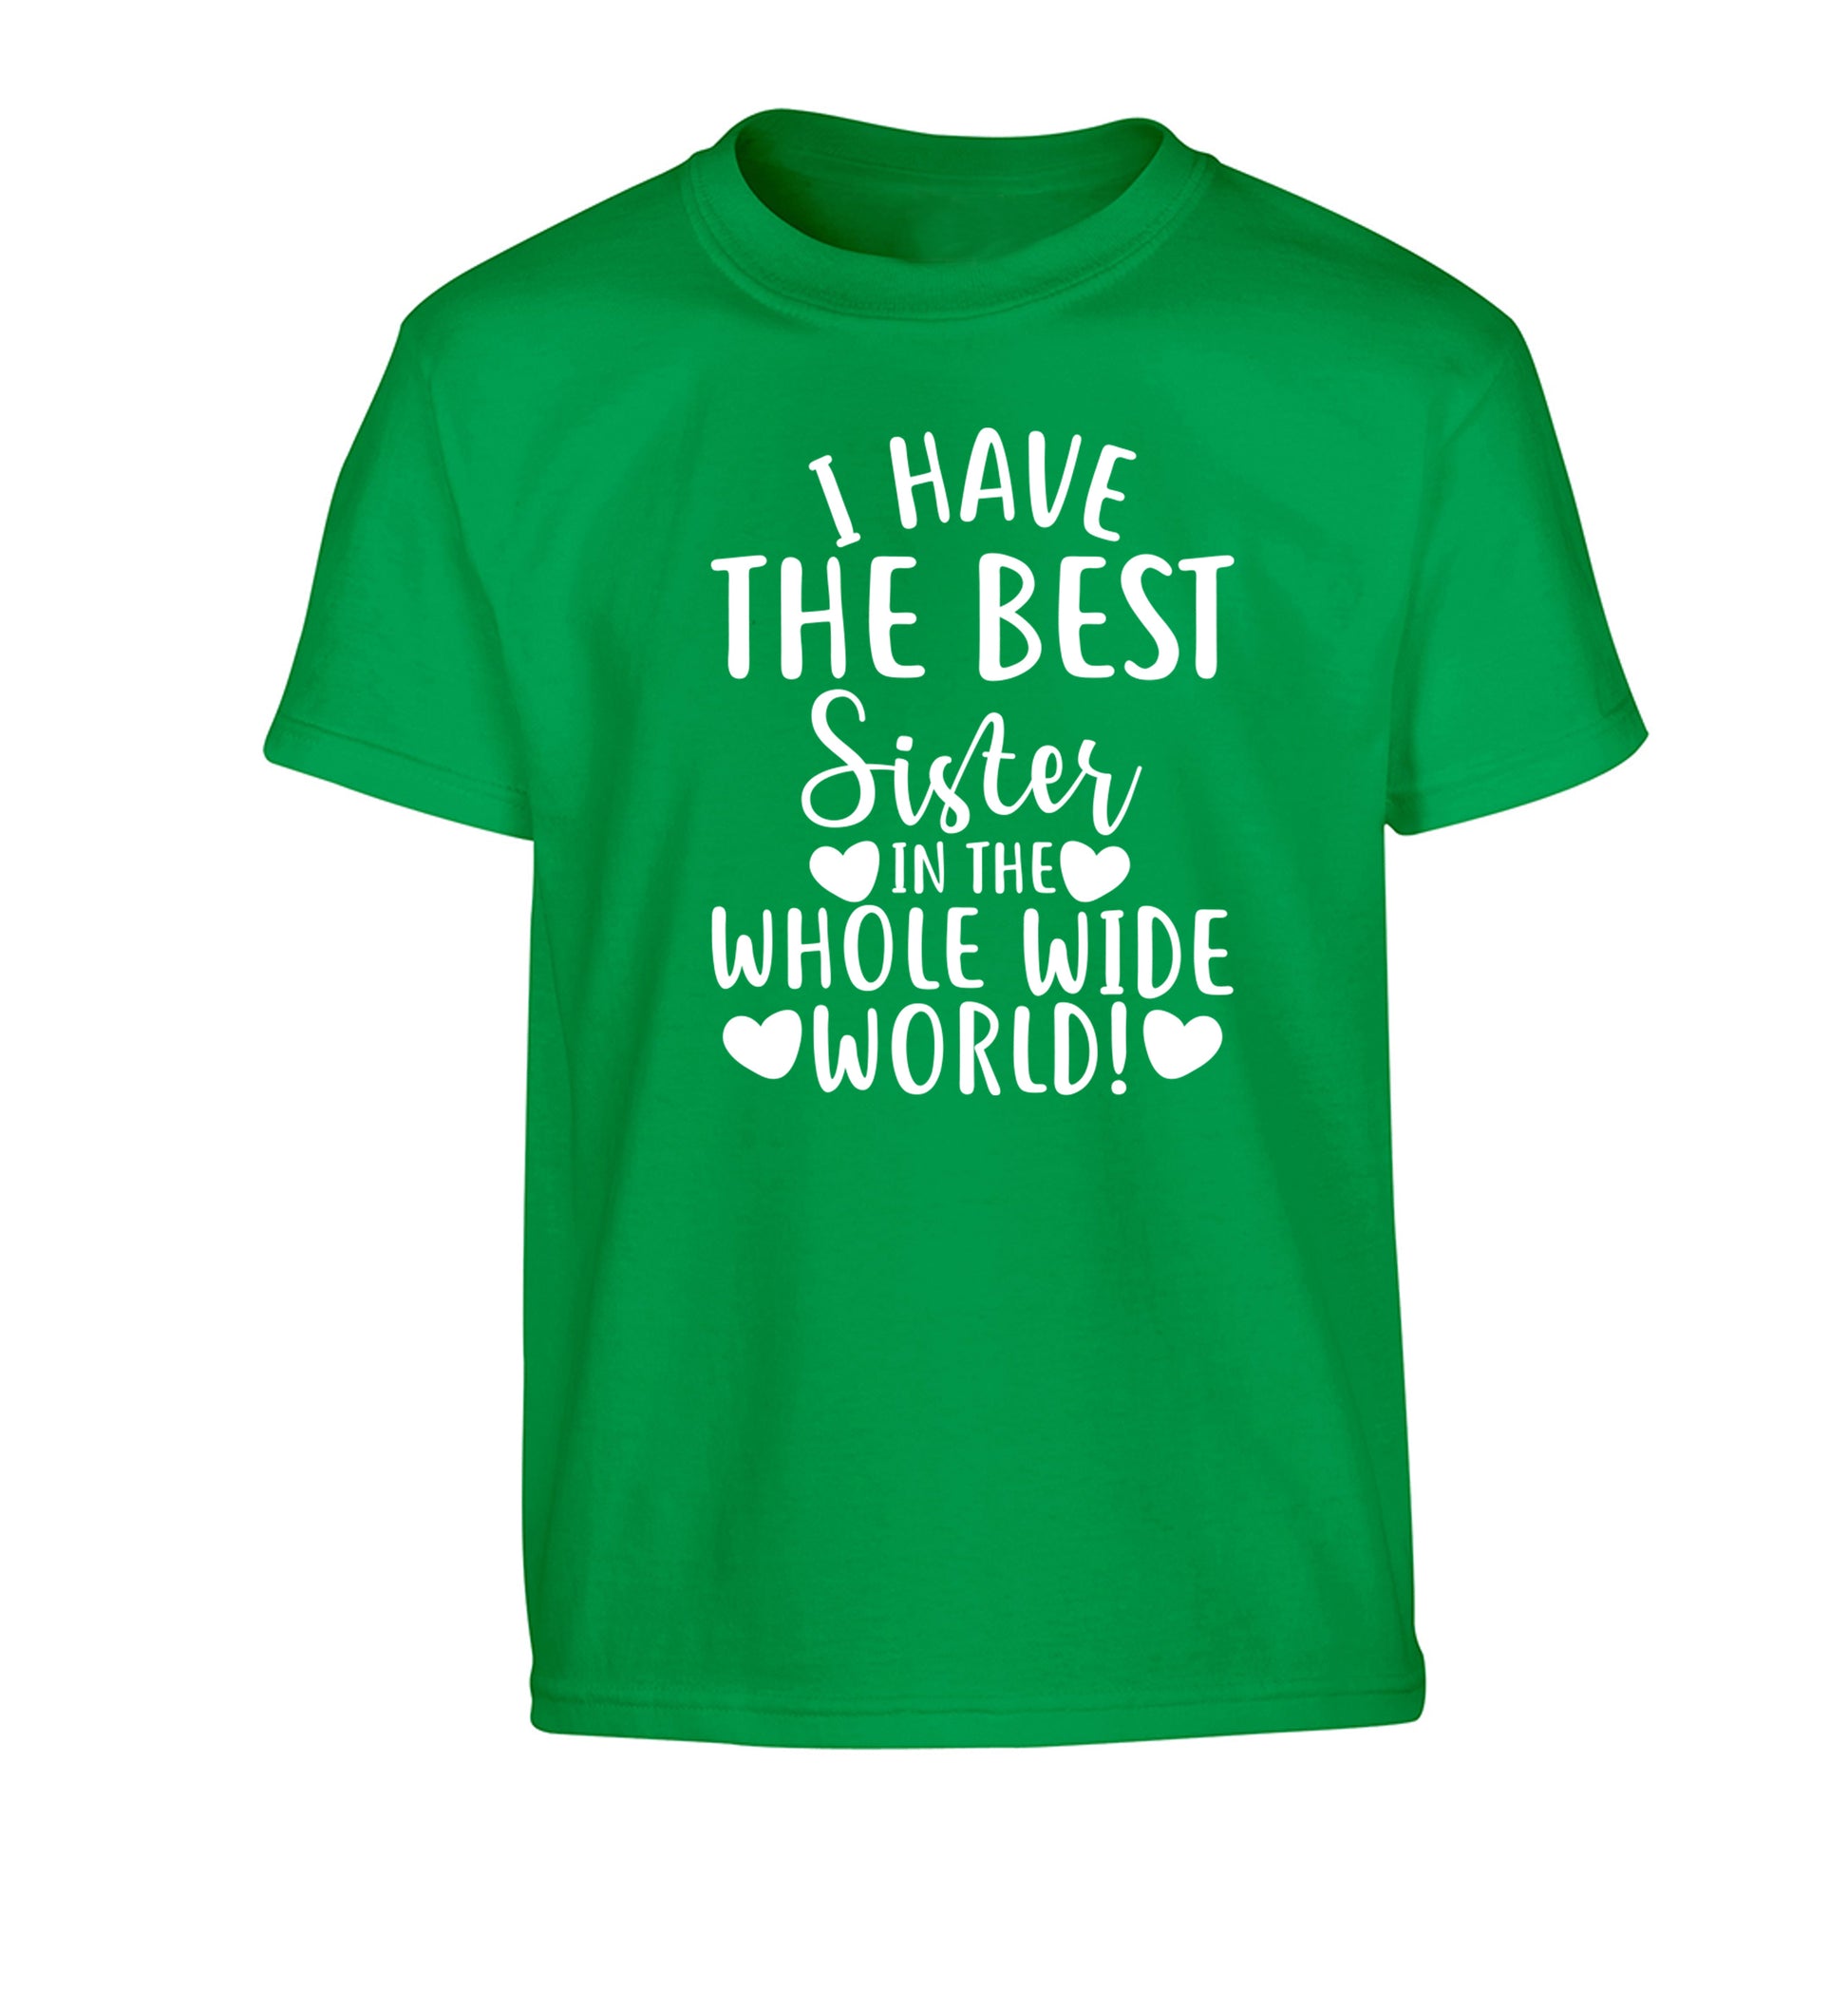 I have the best sister in the whole wide world! Children's green Tshirt 12-13 Years